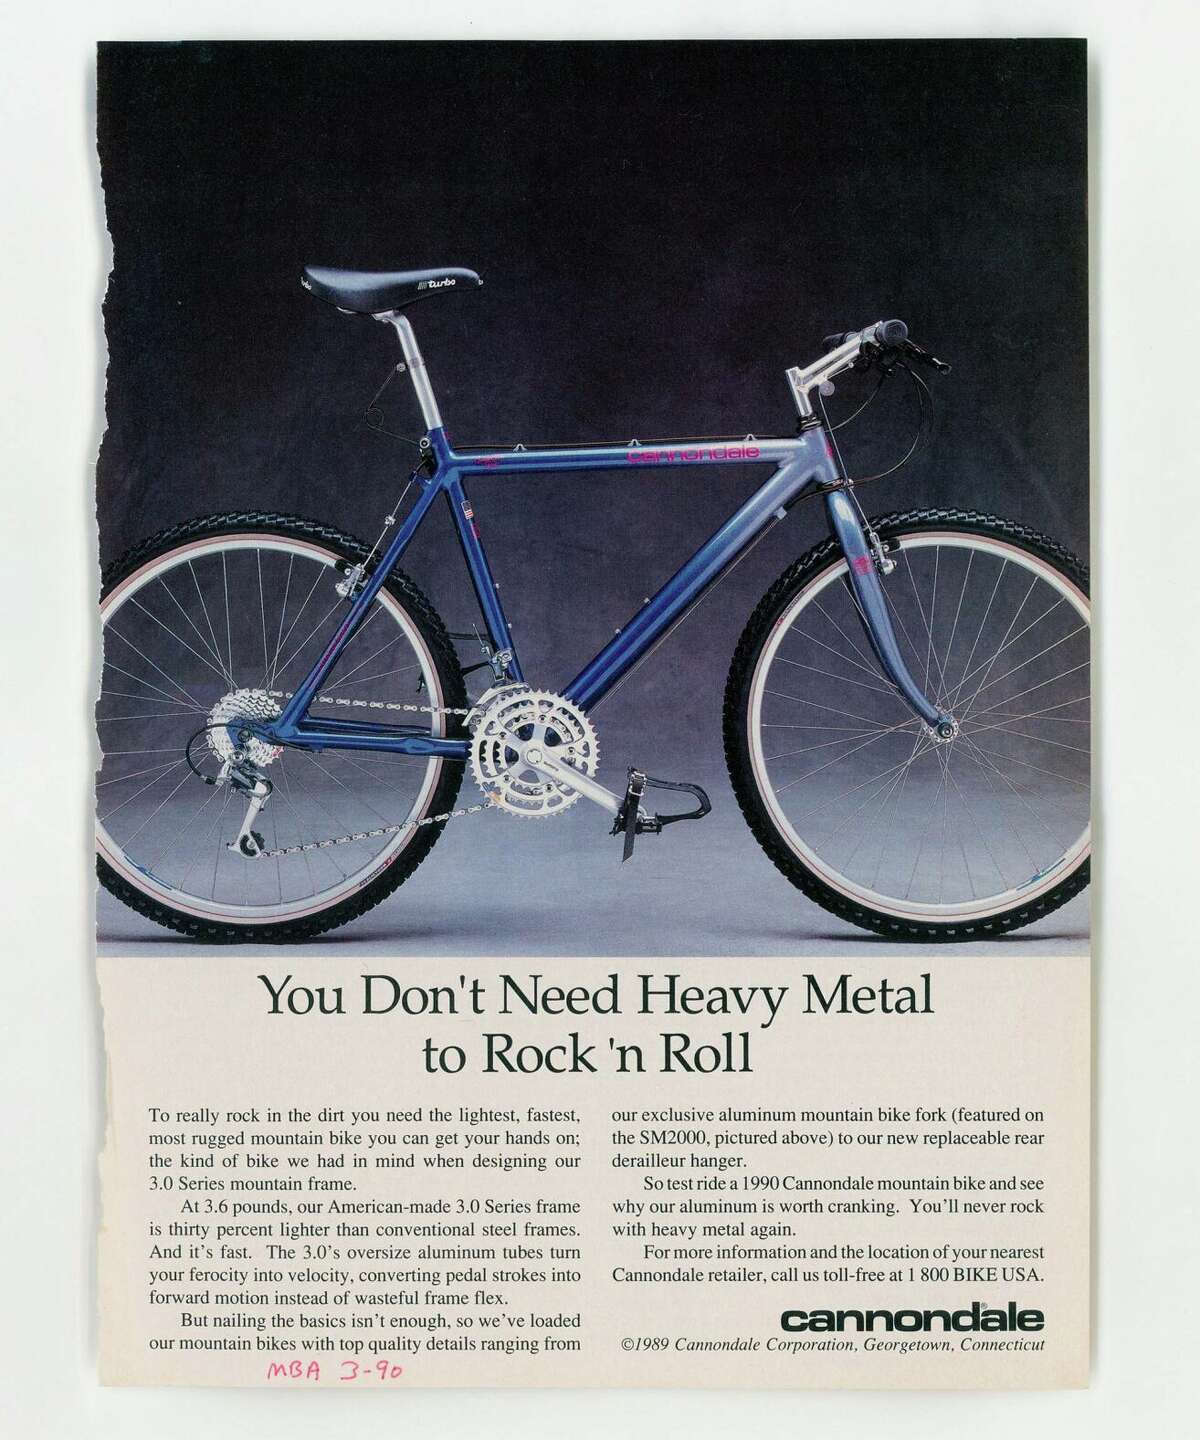 A Cannondale advertisement from 1990.